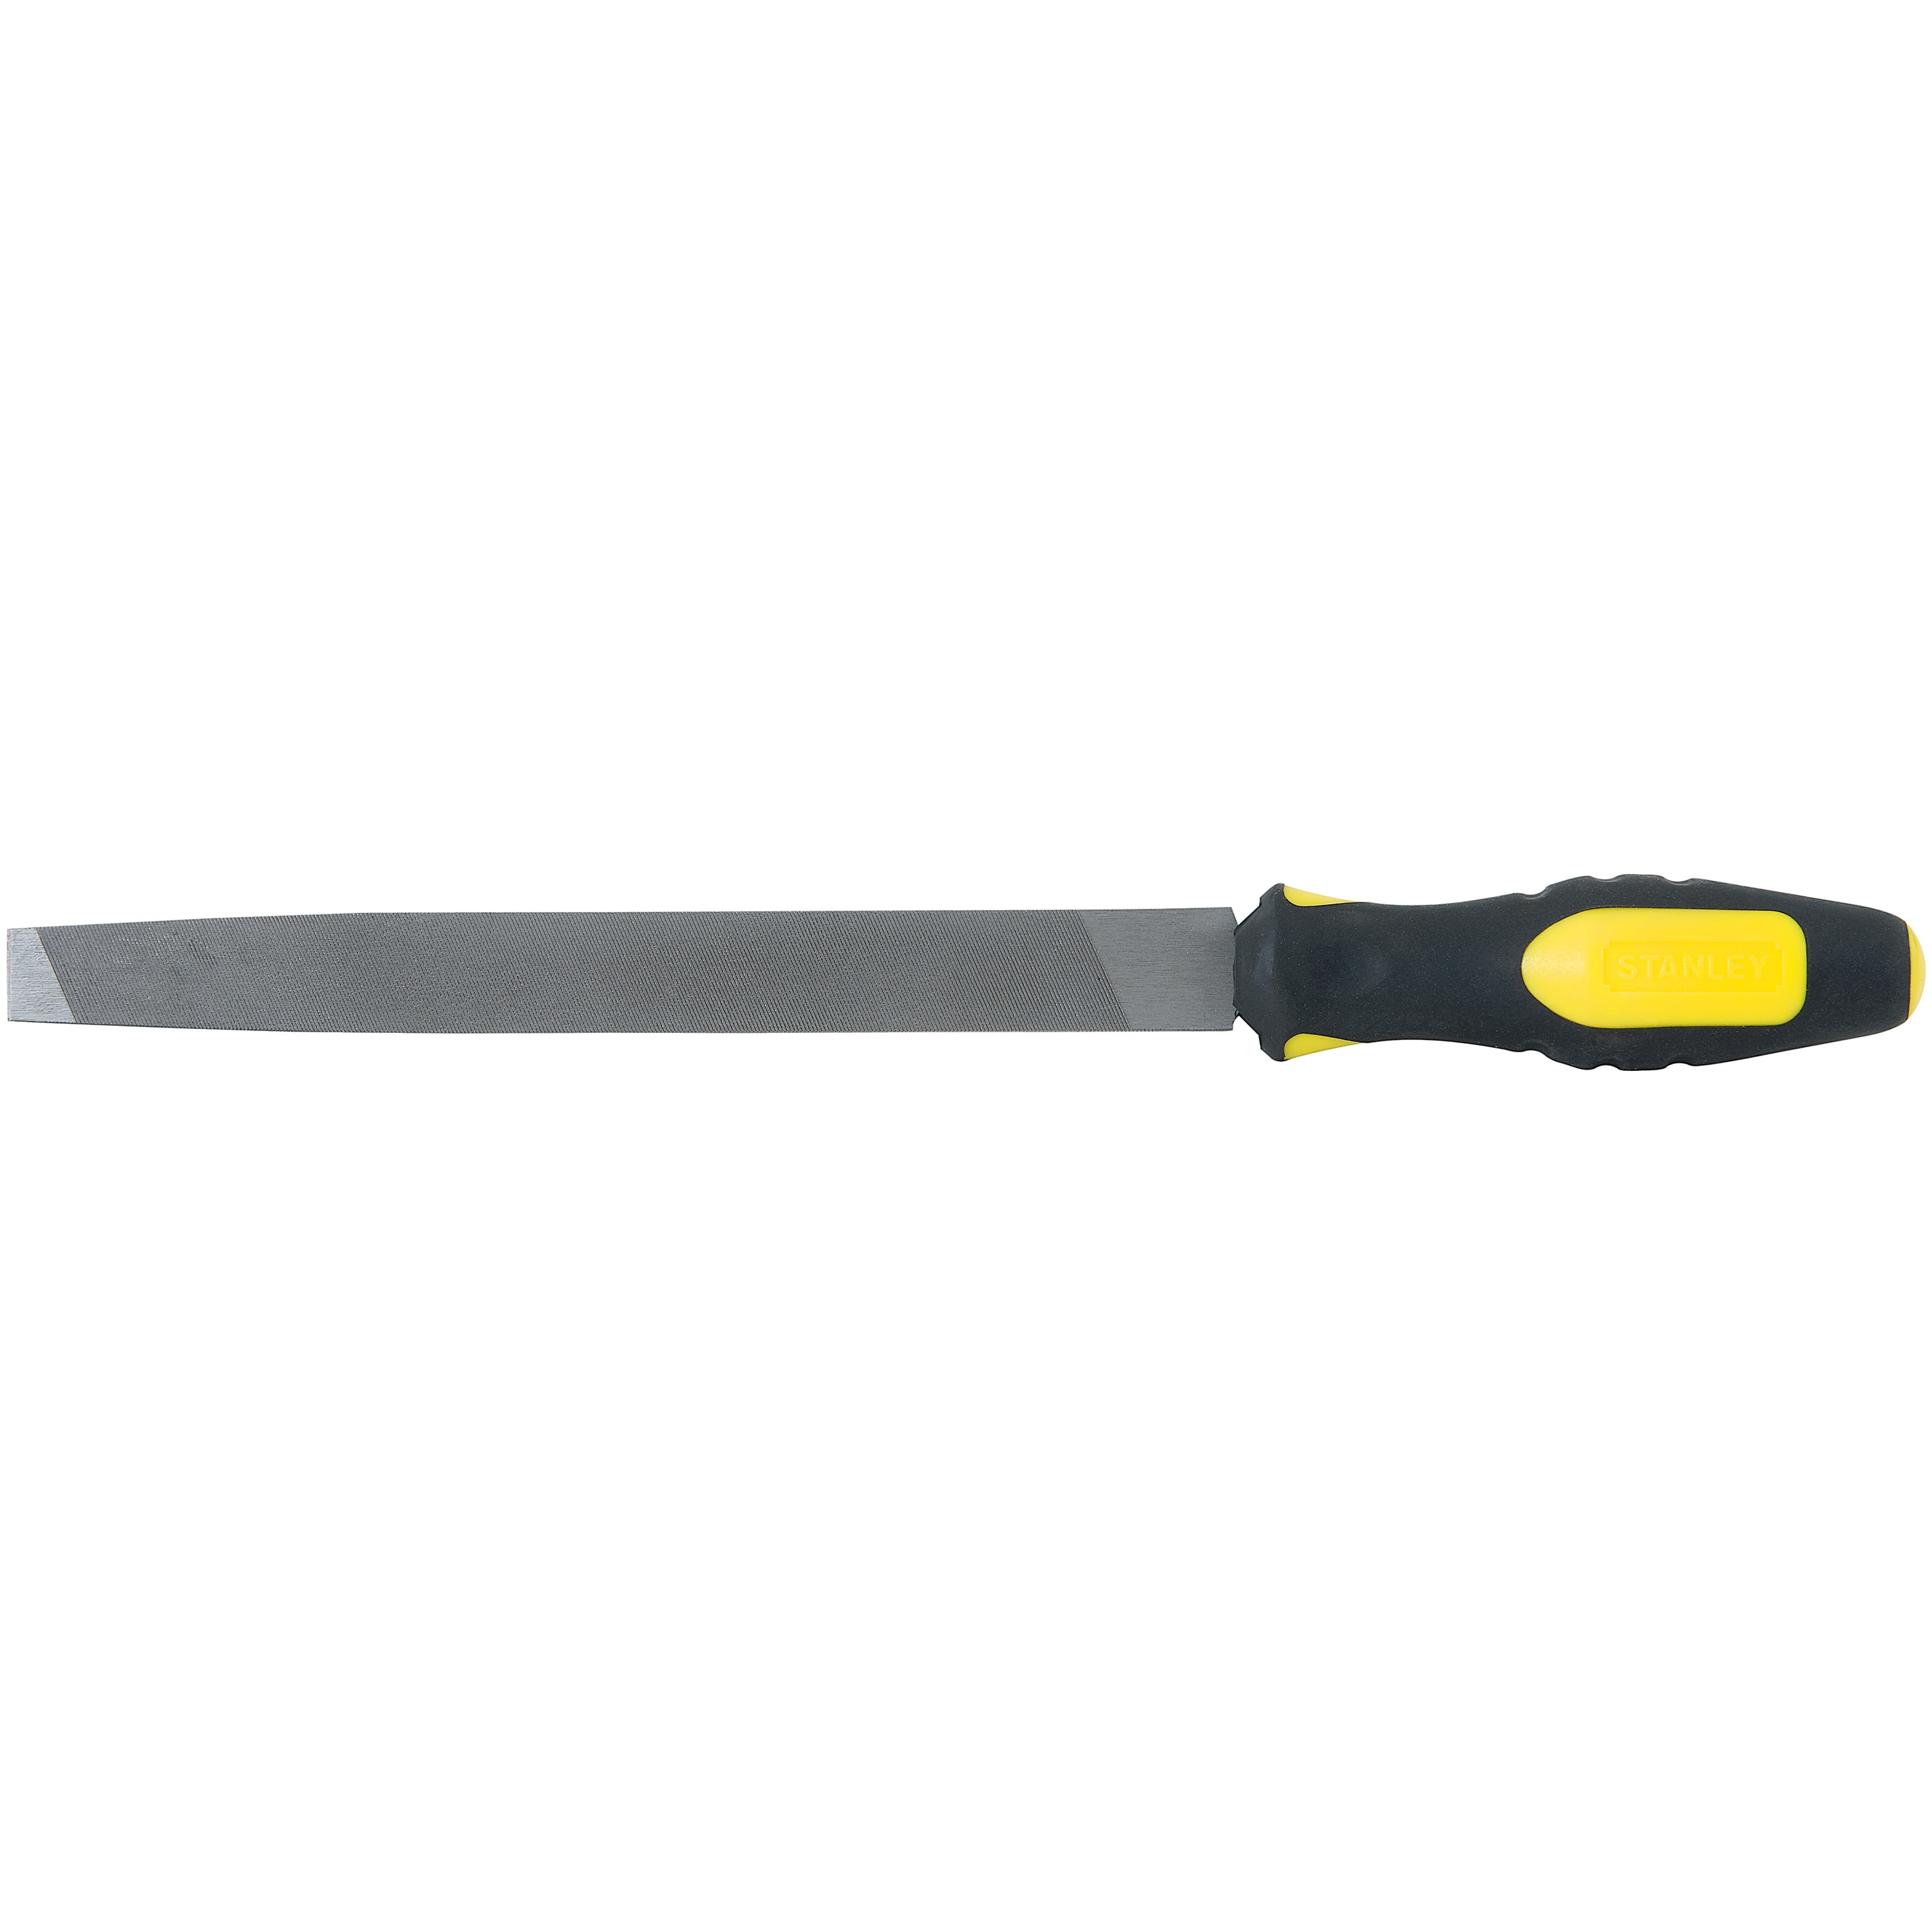 Stanley Tools - 8 in SingleCut Handy File with Handle - 21-106